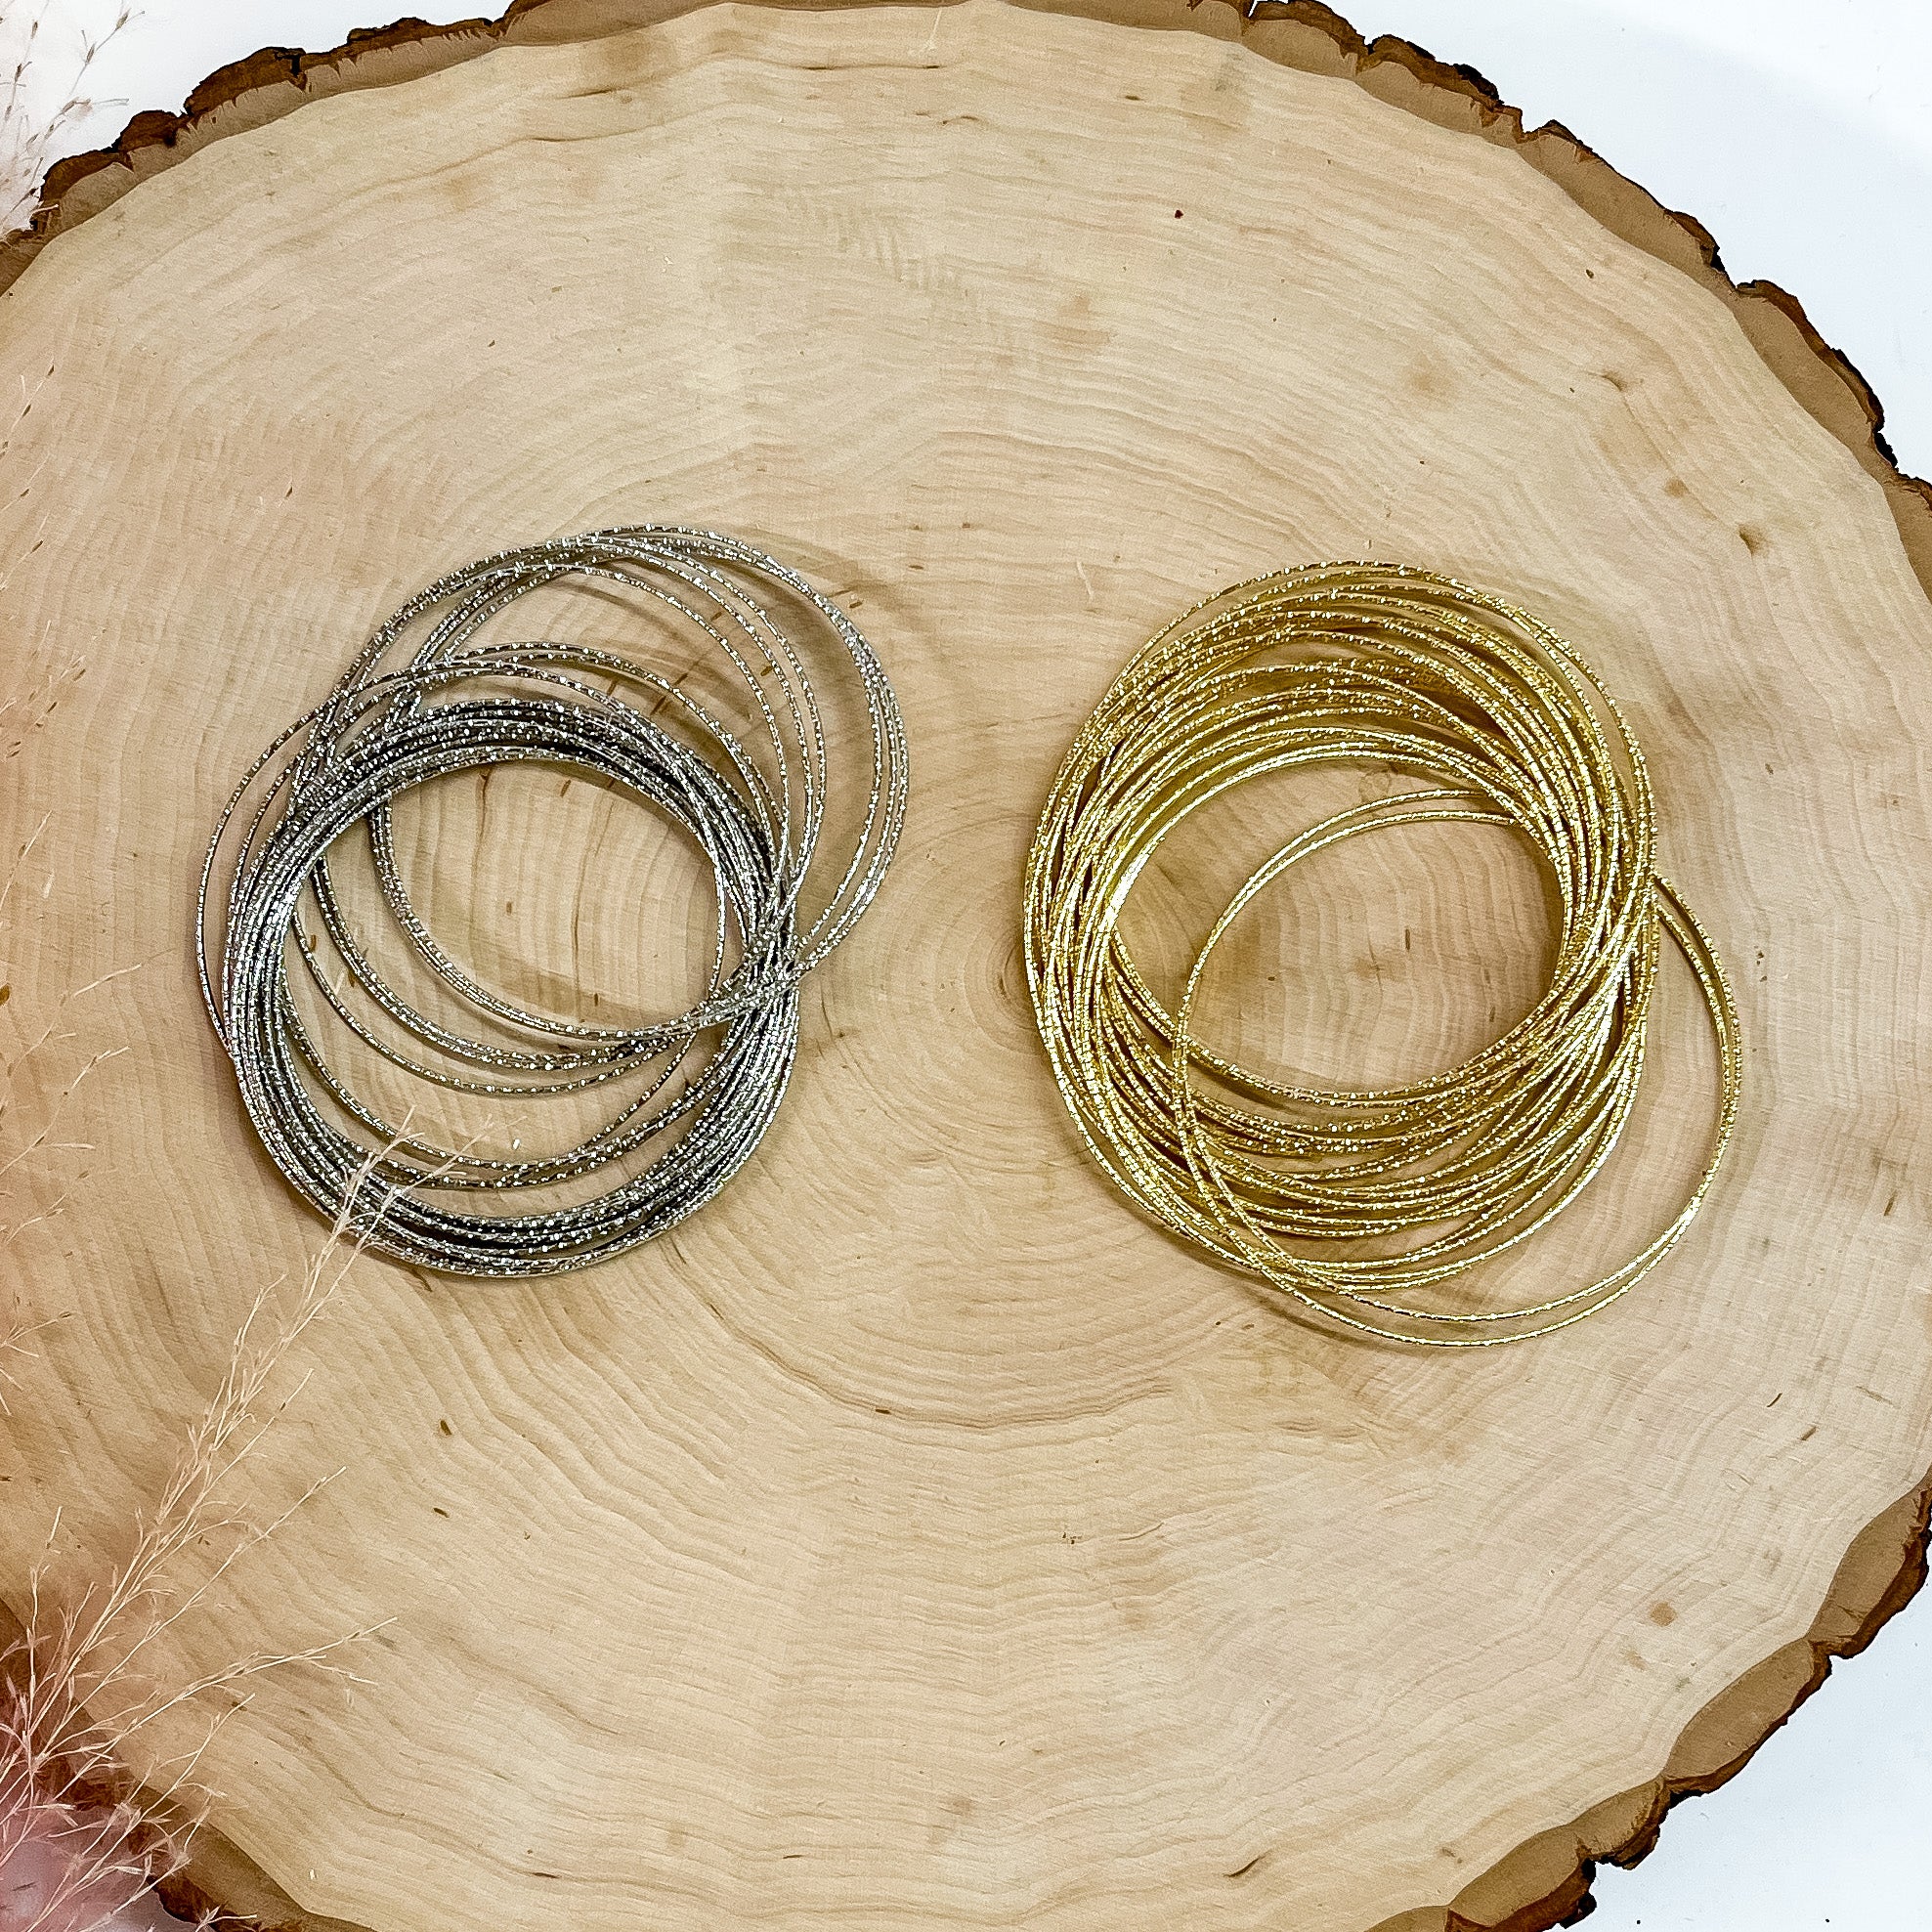 Pictured on a piece of wood are two bracelet bangle sets. One set is in silver and the other set is in gold. 